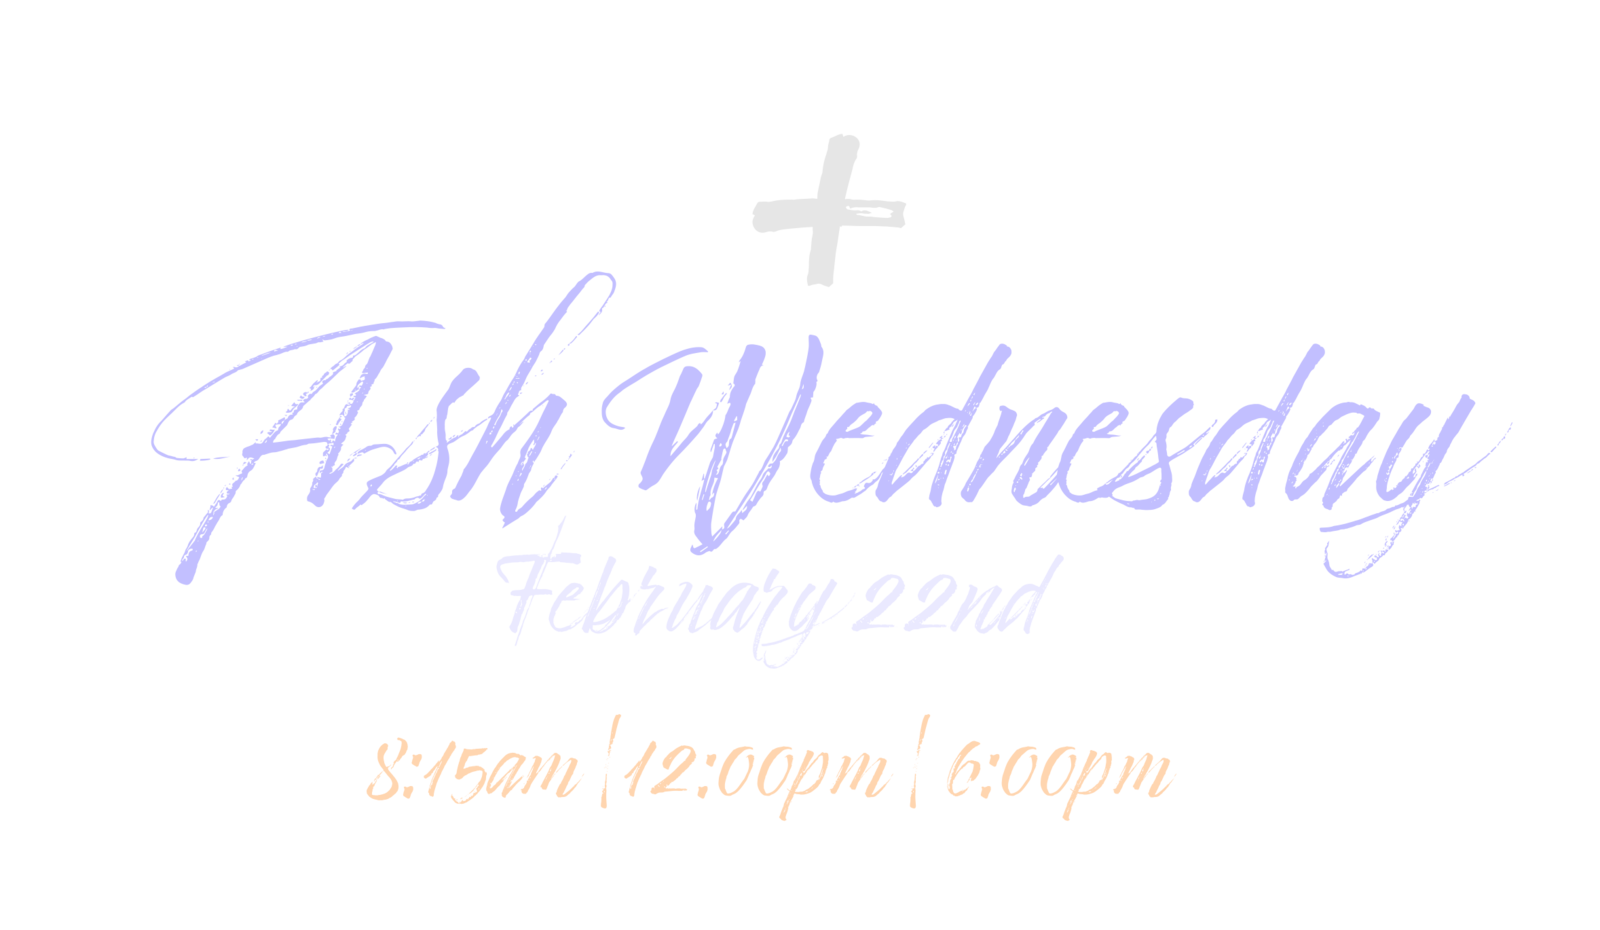 Ash Wednesday February 22nd, 2023 8:15am, 12:00pm, and 6:00pm